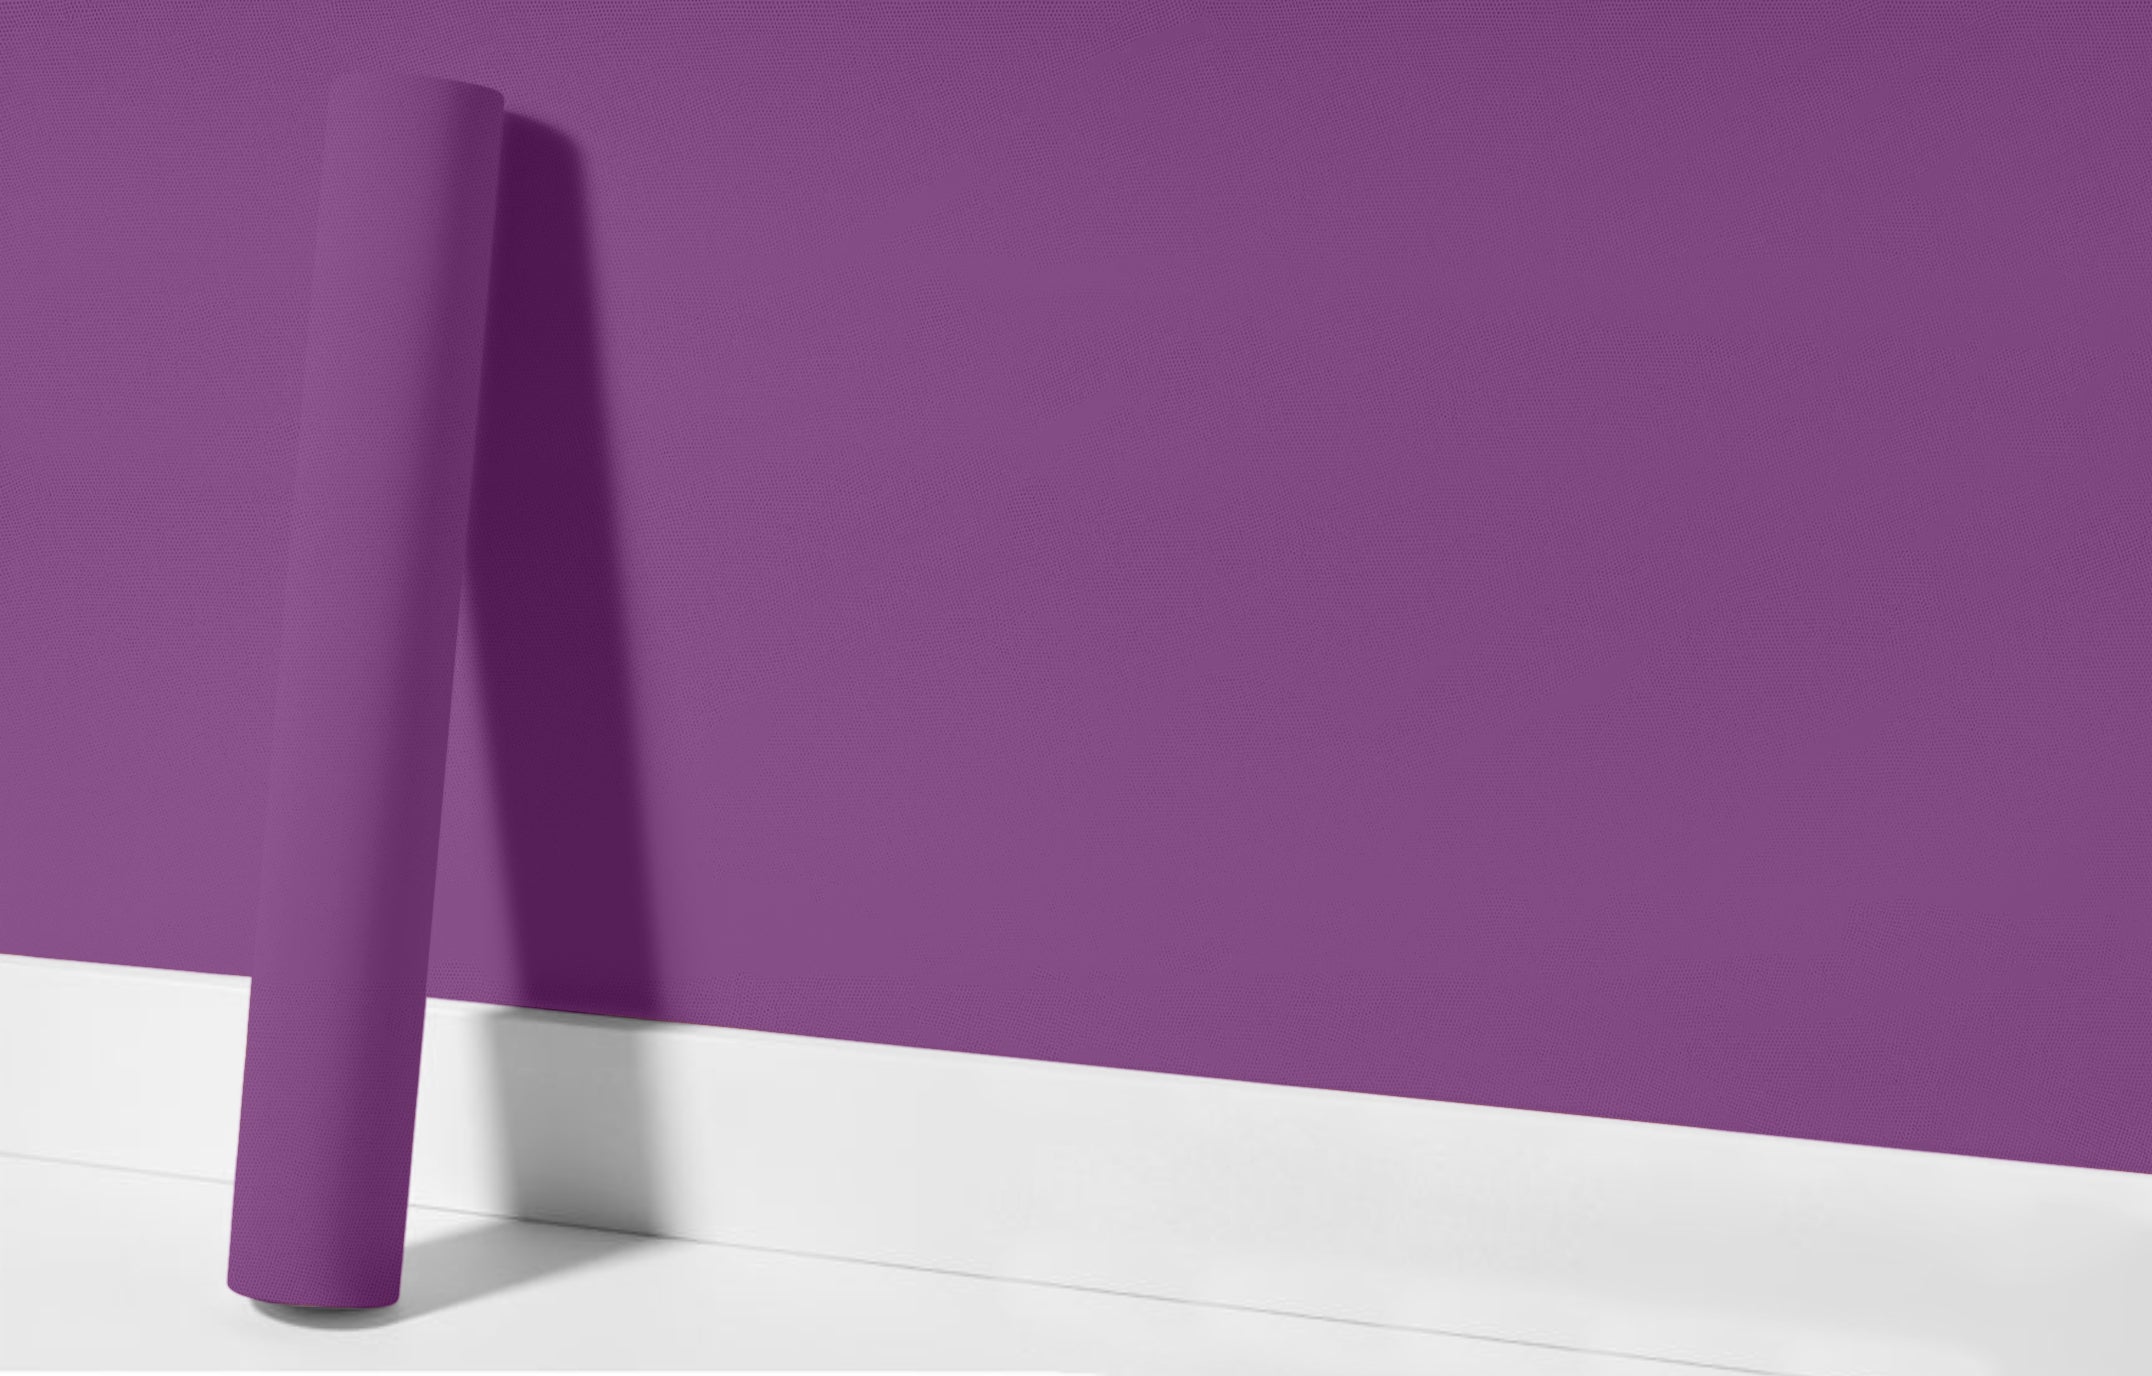 Peel & Stick Removable Re-usable Paint - Color RAL 4008 Signal Violet - offRAL™ - RALRAW LLC, USA